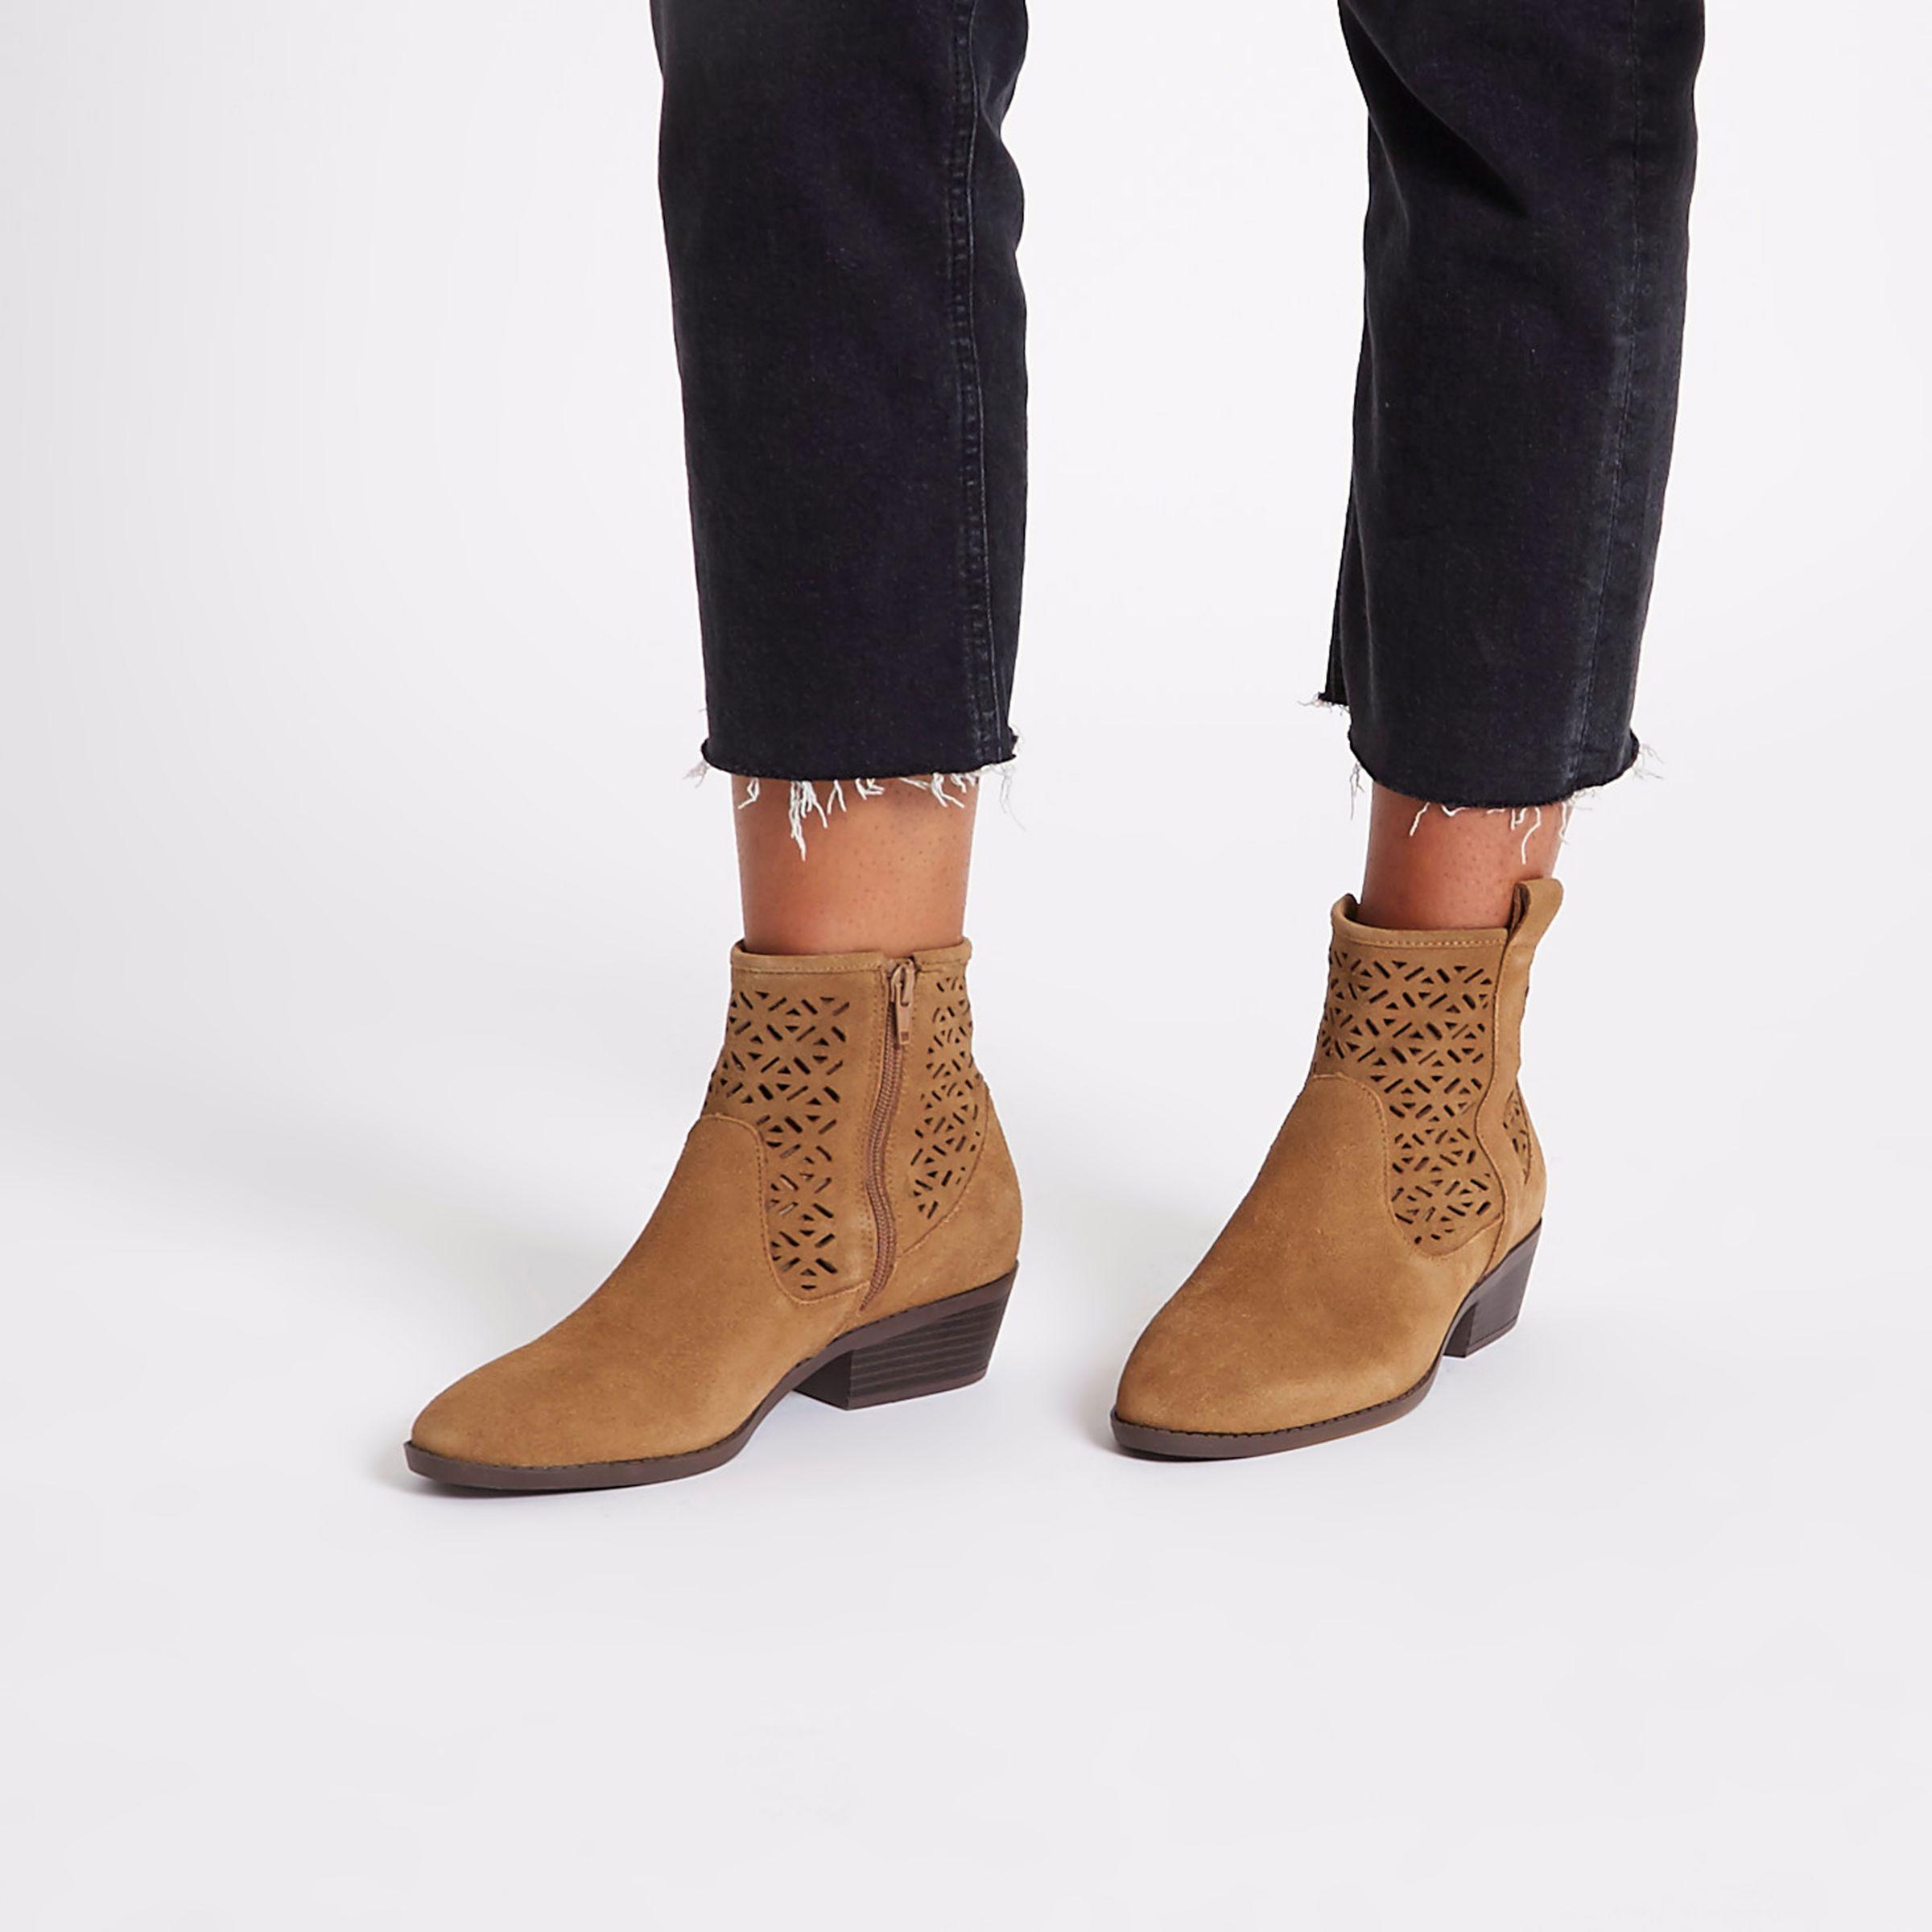 River Island Laser Cut Suede Western Ankle Boots in Tan (Brown) - Lyst